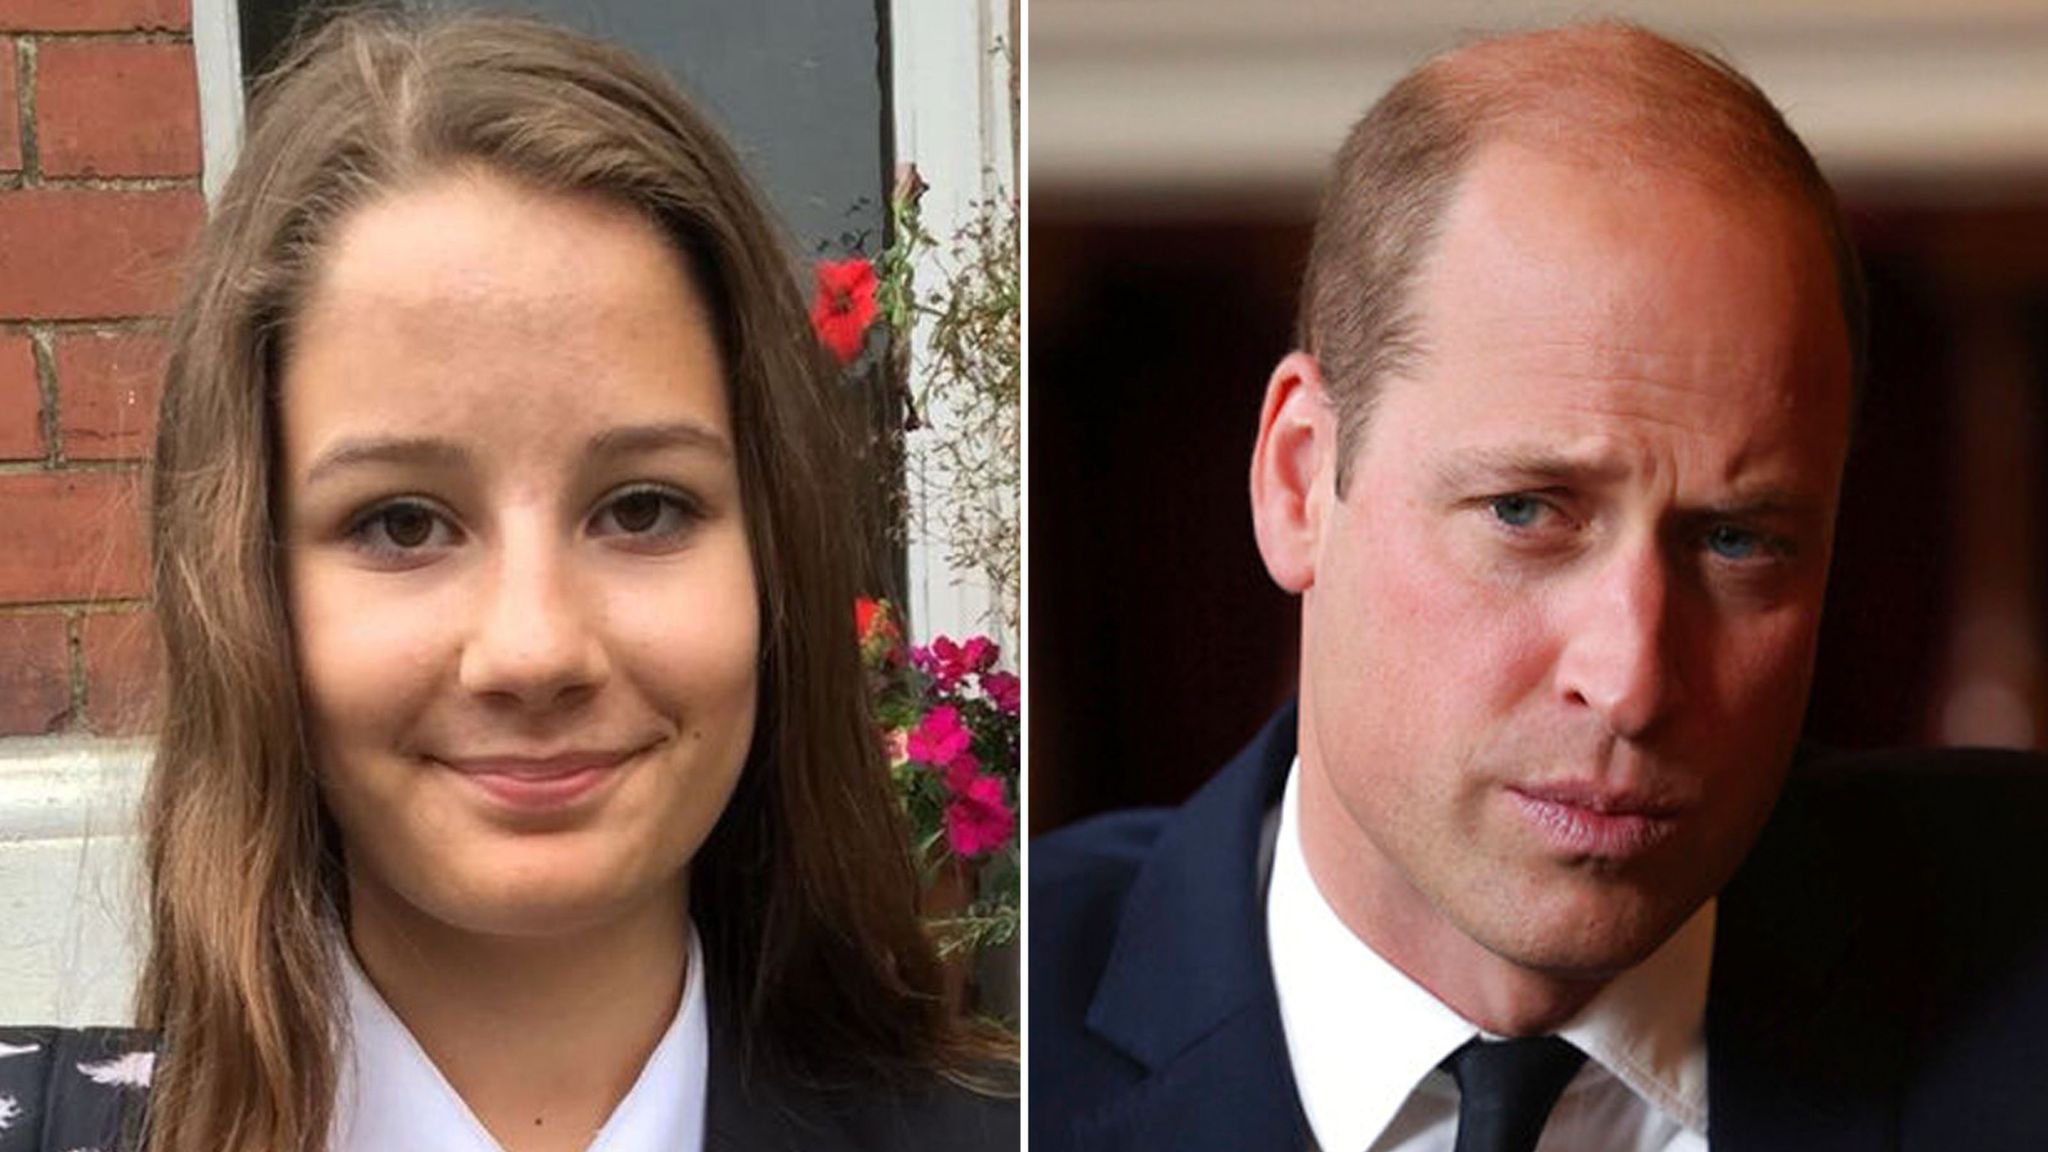 Prince William calls for improved online safety after coroner's ruling in Molly  Russell death | UK News | Sky News